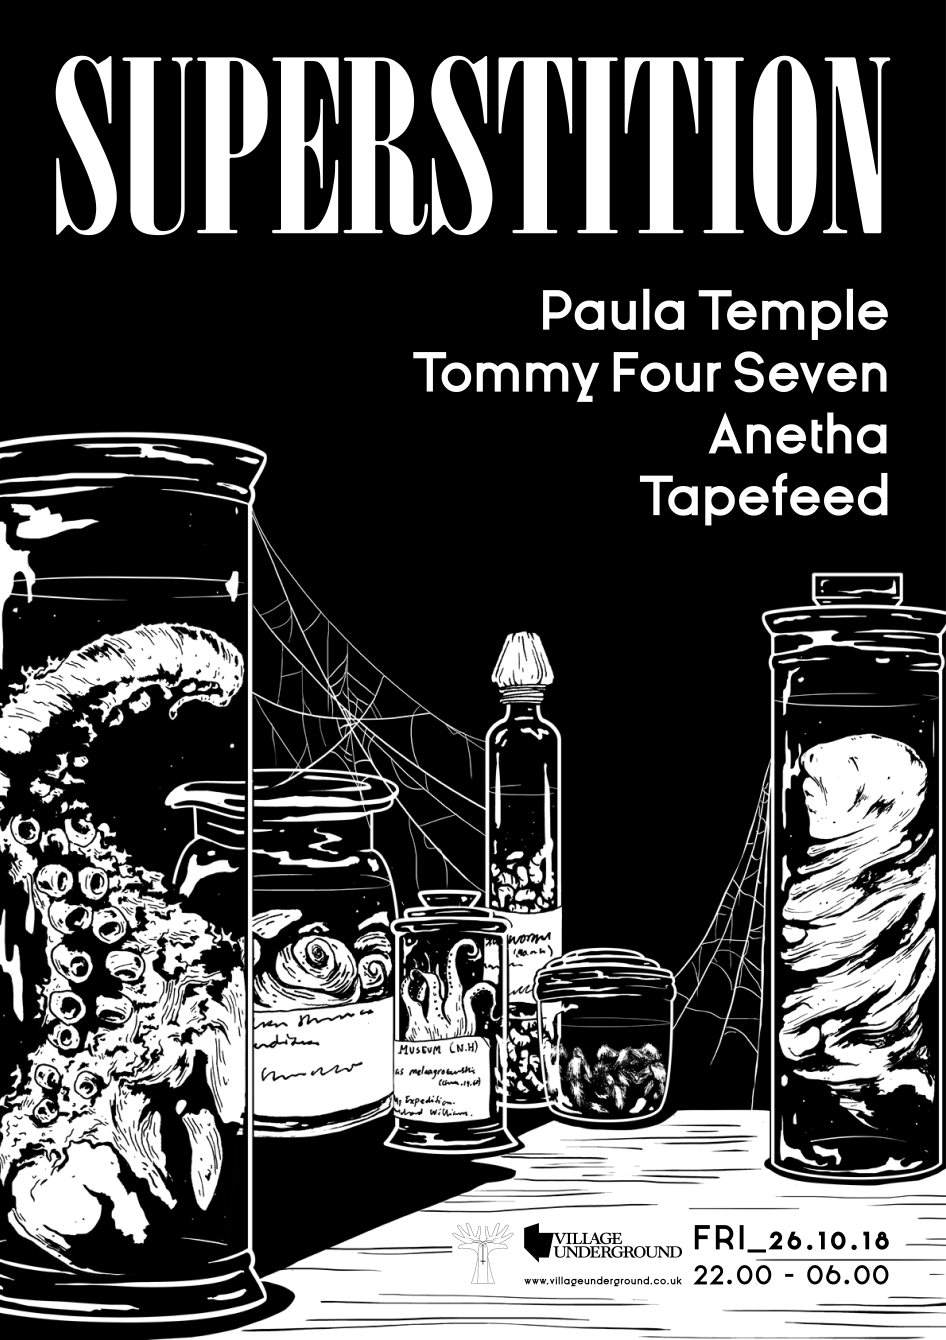 Superstition Halloween Part 1: Paula Temple, Tommy Four Seven, Anetha, Tapefeed - Página trasera